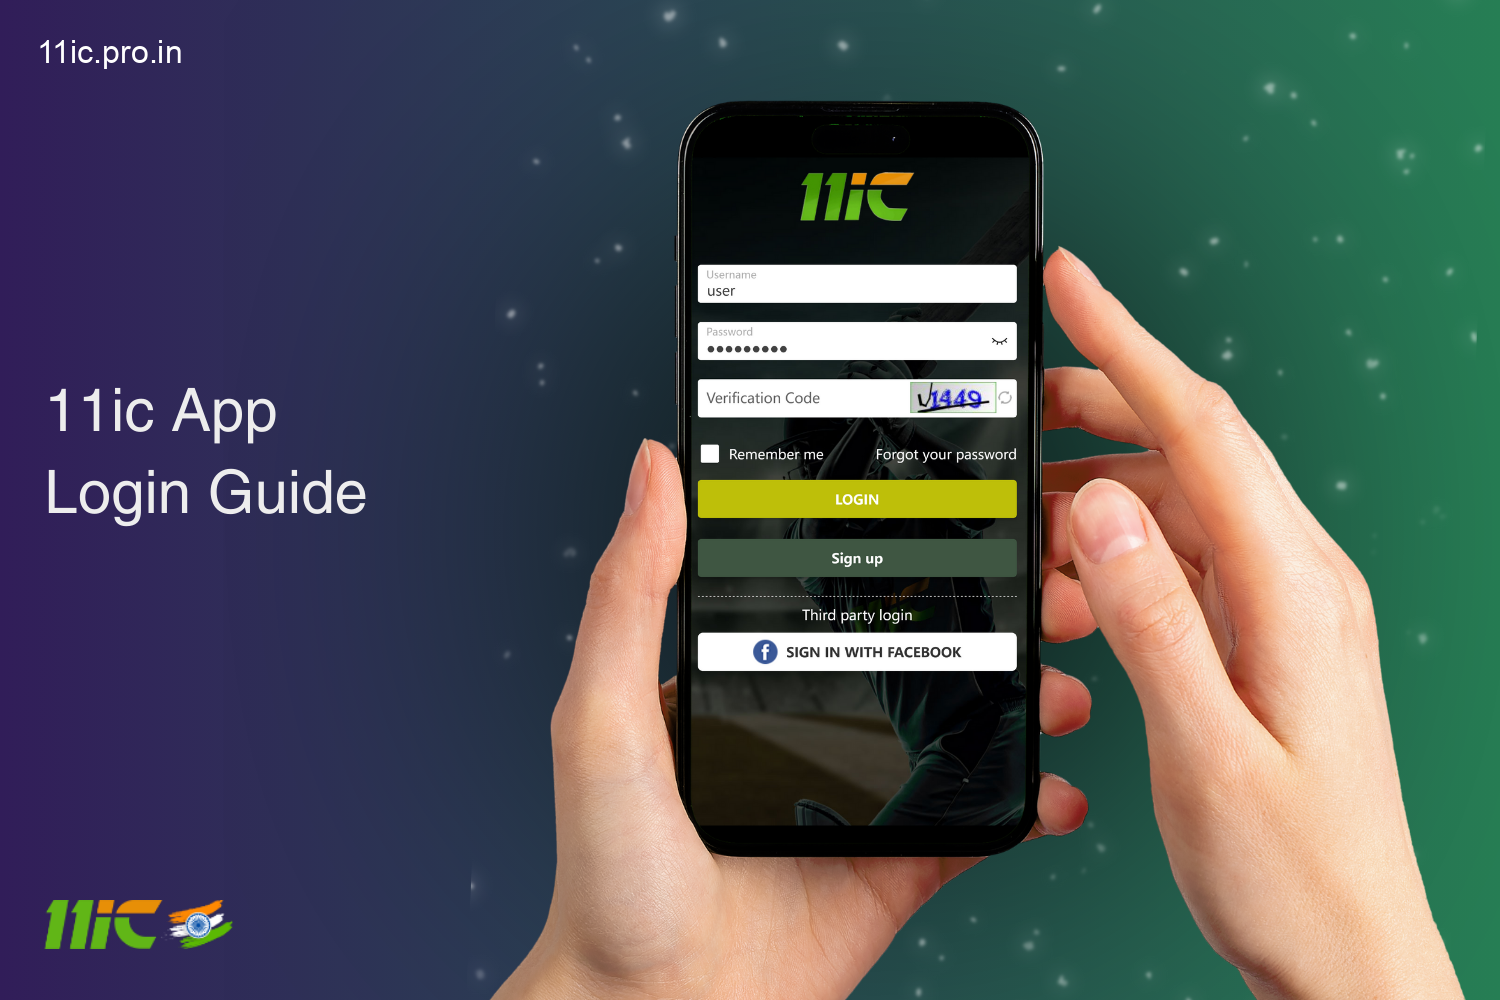 To enter the 11ic app in India click enter, enter details, confirm - start playing quickly and conveniently